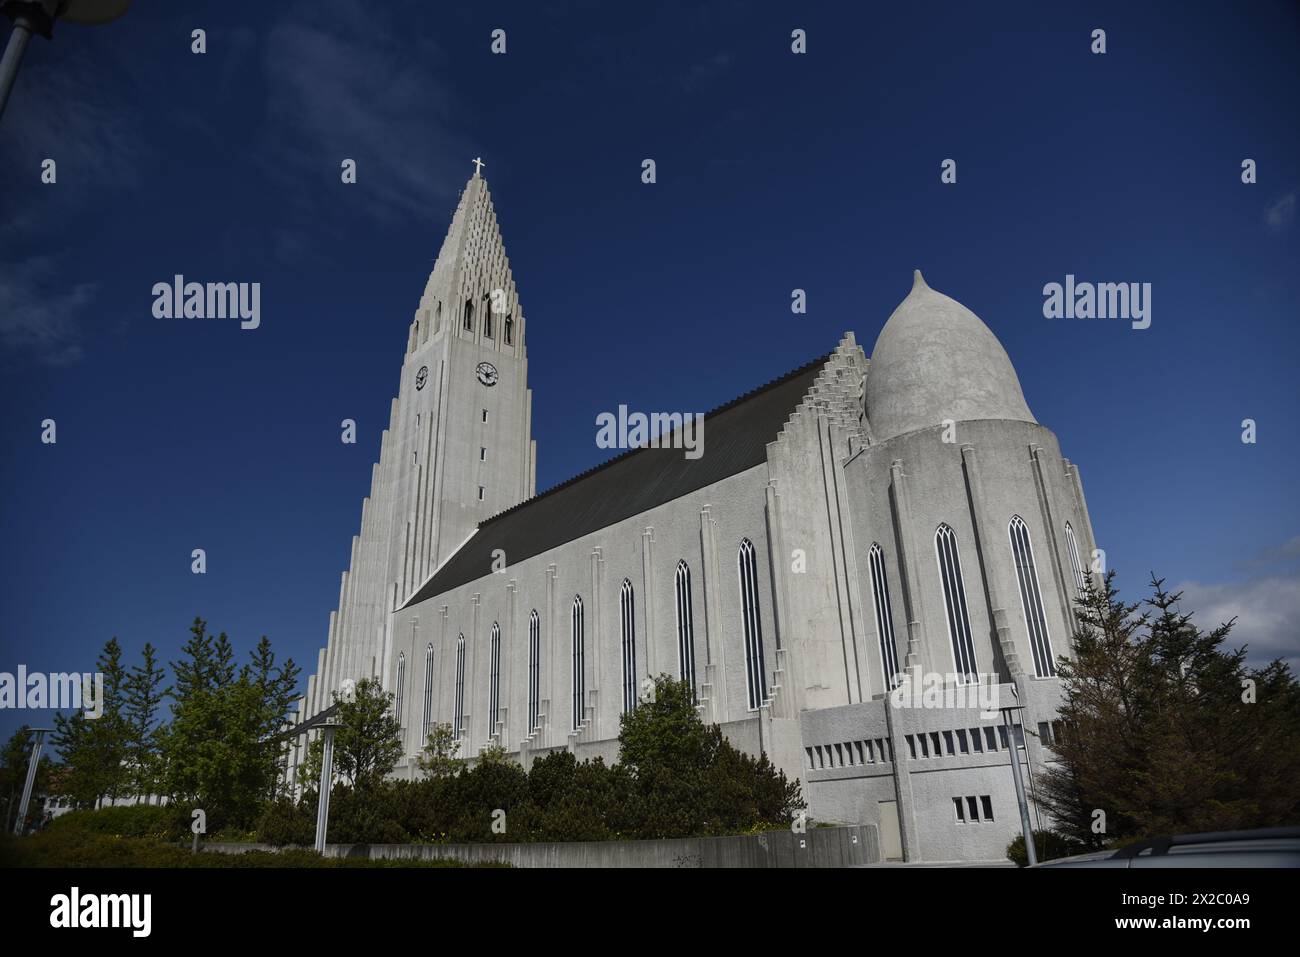 Hallgrímskirkja - largest church in Iceland. Designed to resemble the rocks, mountains and glaciers of Iceland's landscape. Brilliant architecture. Stock Photo